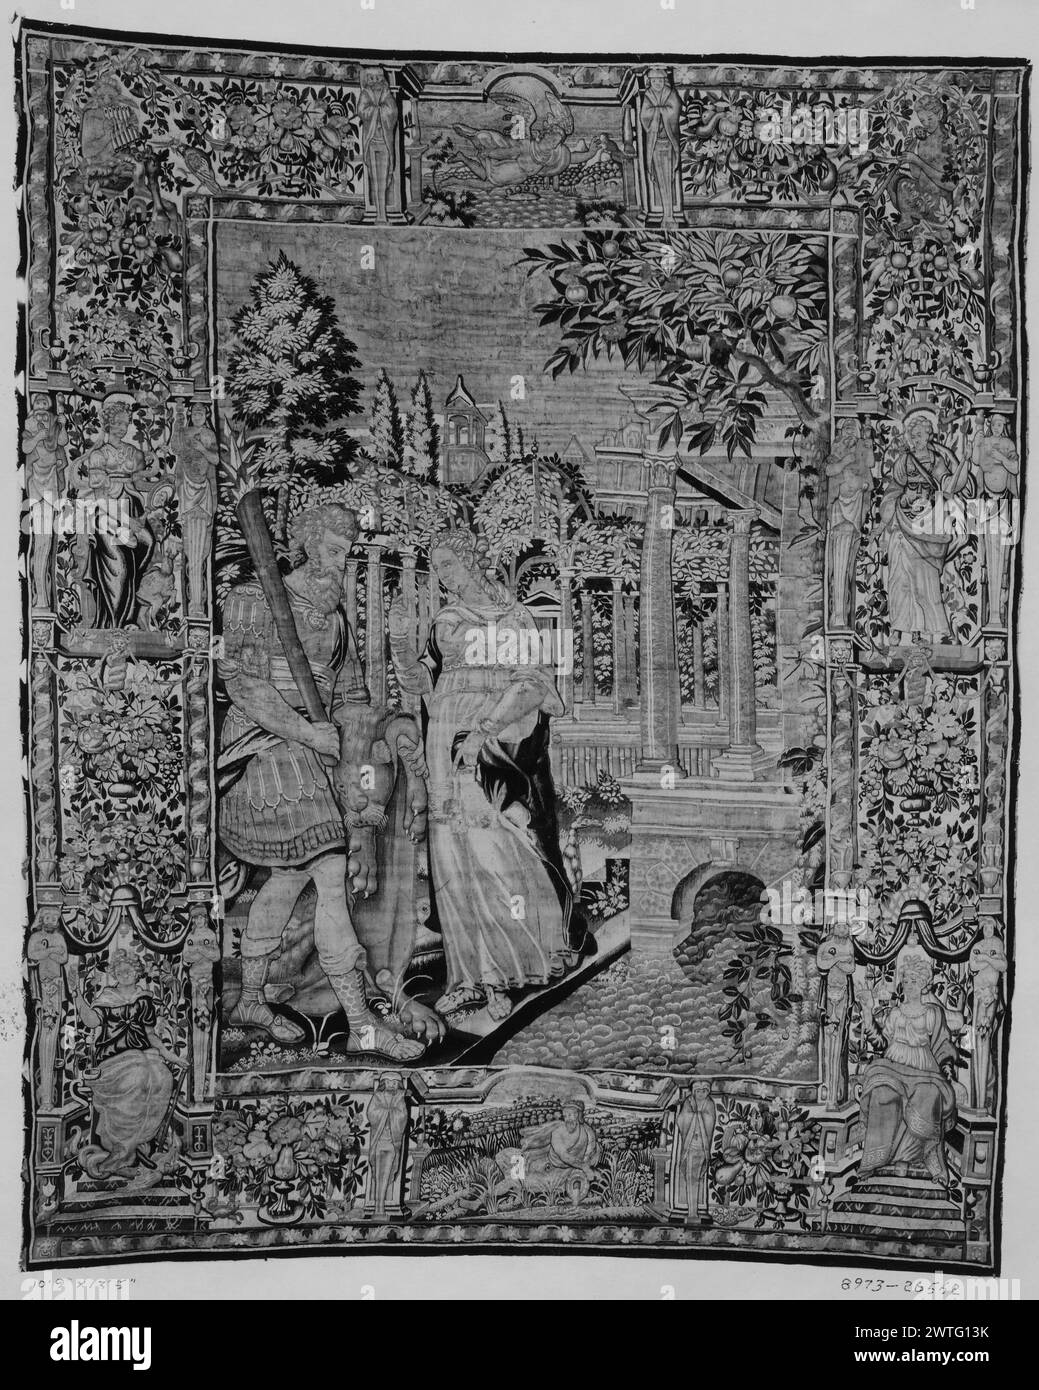 Hercules with Virtue. unknown c. 1600 Tapestry Dimensions: H 13'5' x W 10'9' Tapestry Materials/Techniques: unknown Culture: Flemish Weaving Center: Brussels Ownership History: French & Co. purchased from American Art Association (R. Tolentino sale), invoiced 1/31/1925. In garden with architectural backdrop, Hercules stands with his club & lion's skin next to female personification of Virtue (BRD) female figures seated & standing beneath miniature architectural framework, interspersed with bunches of flowers, fruit, small figures & grotesques (UPR & LWR BRD) central landscape scenes with figur Stock Photo